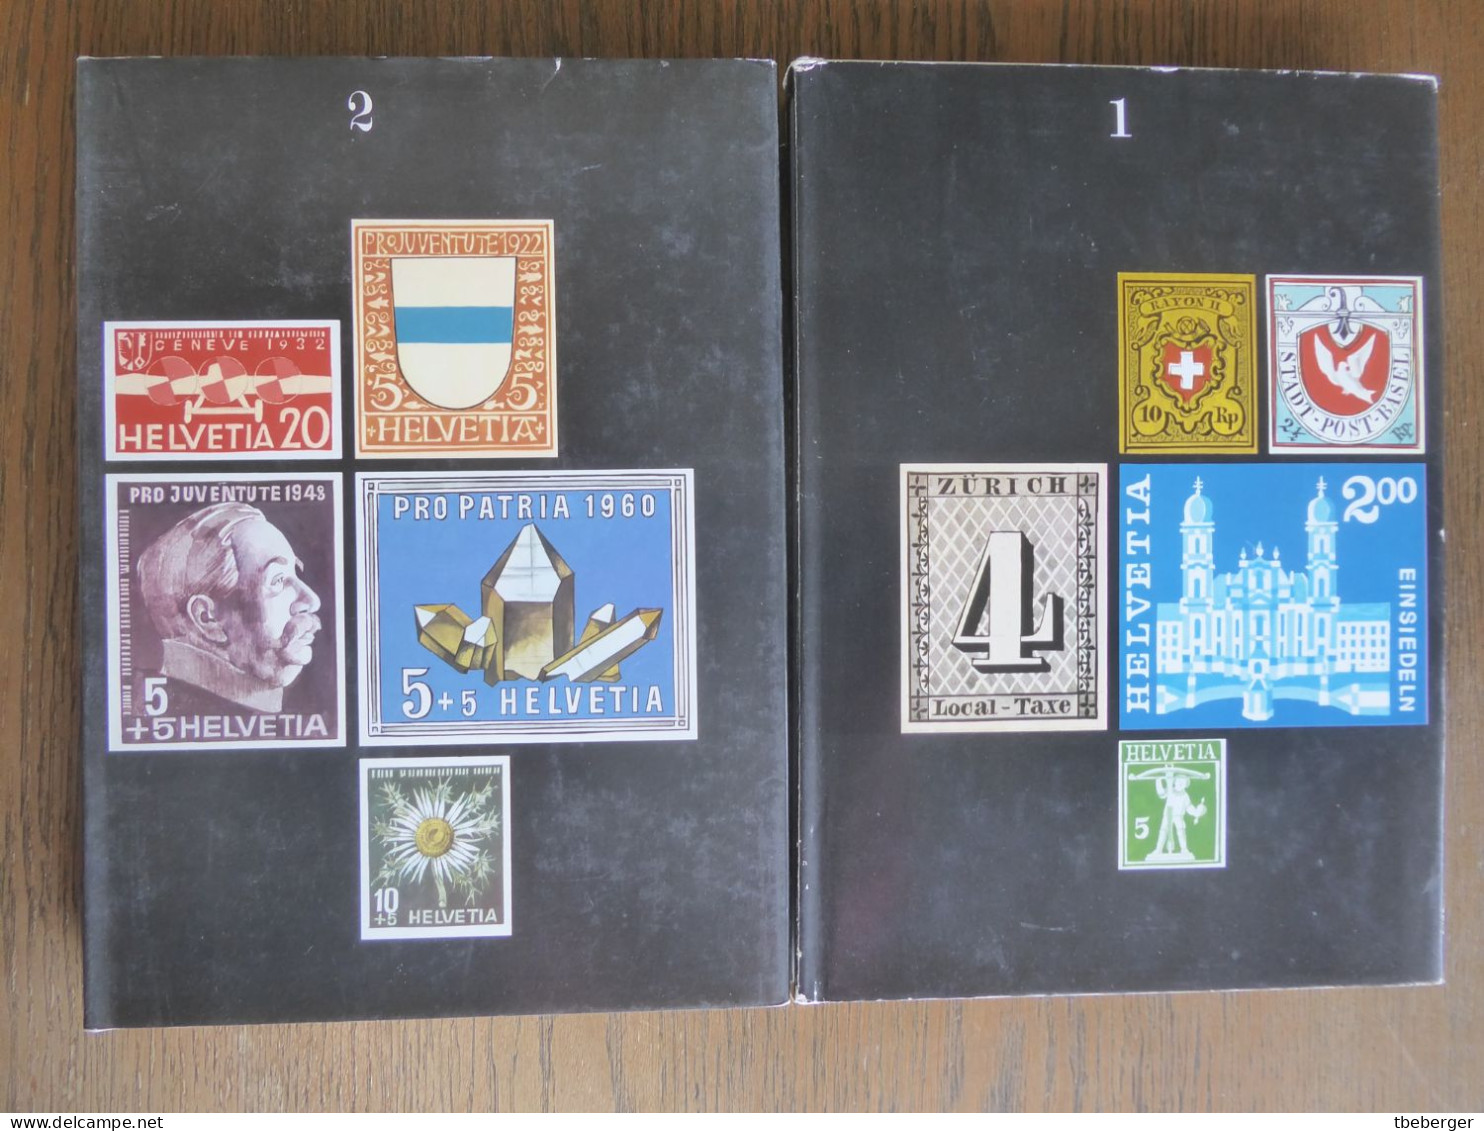 Timbres-poste Suisses 1 & 2 Max Hertsch; Silva Zurich 1973 - Manuales